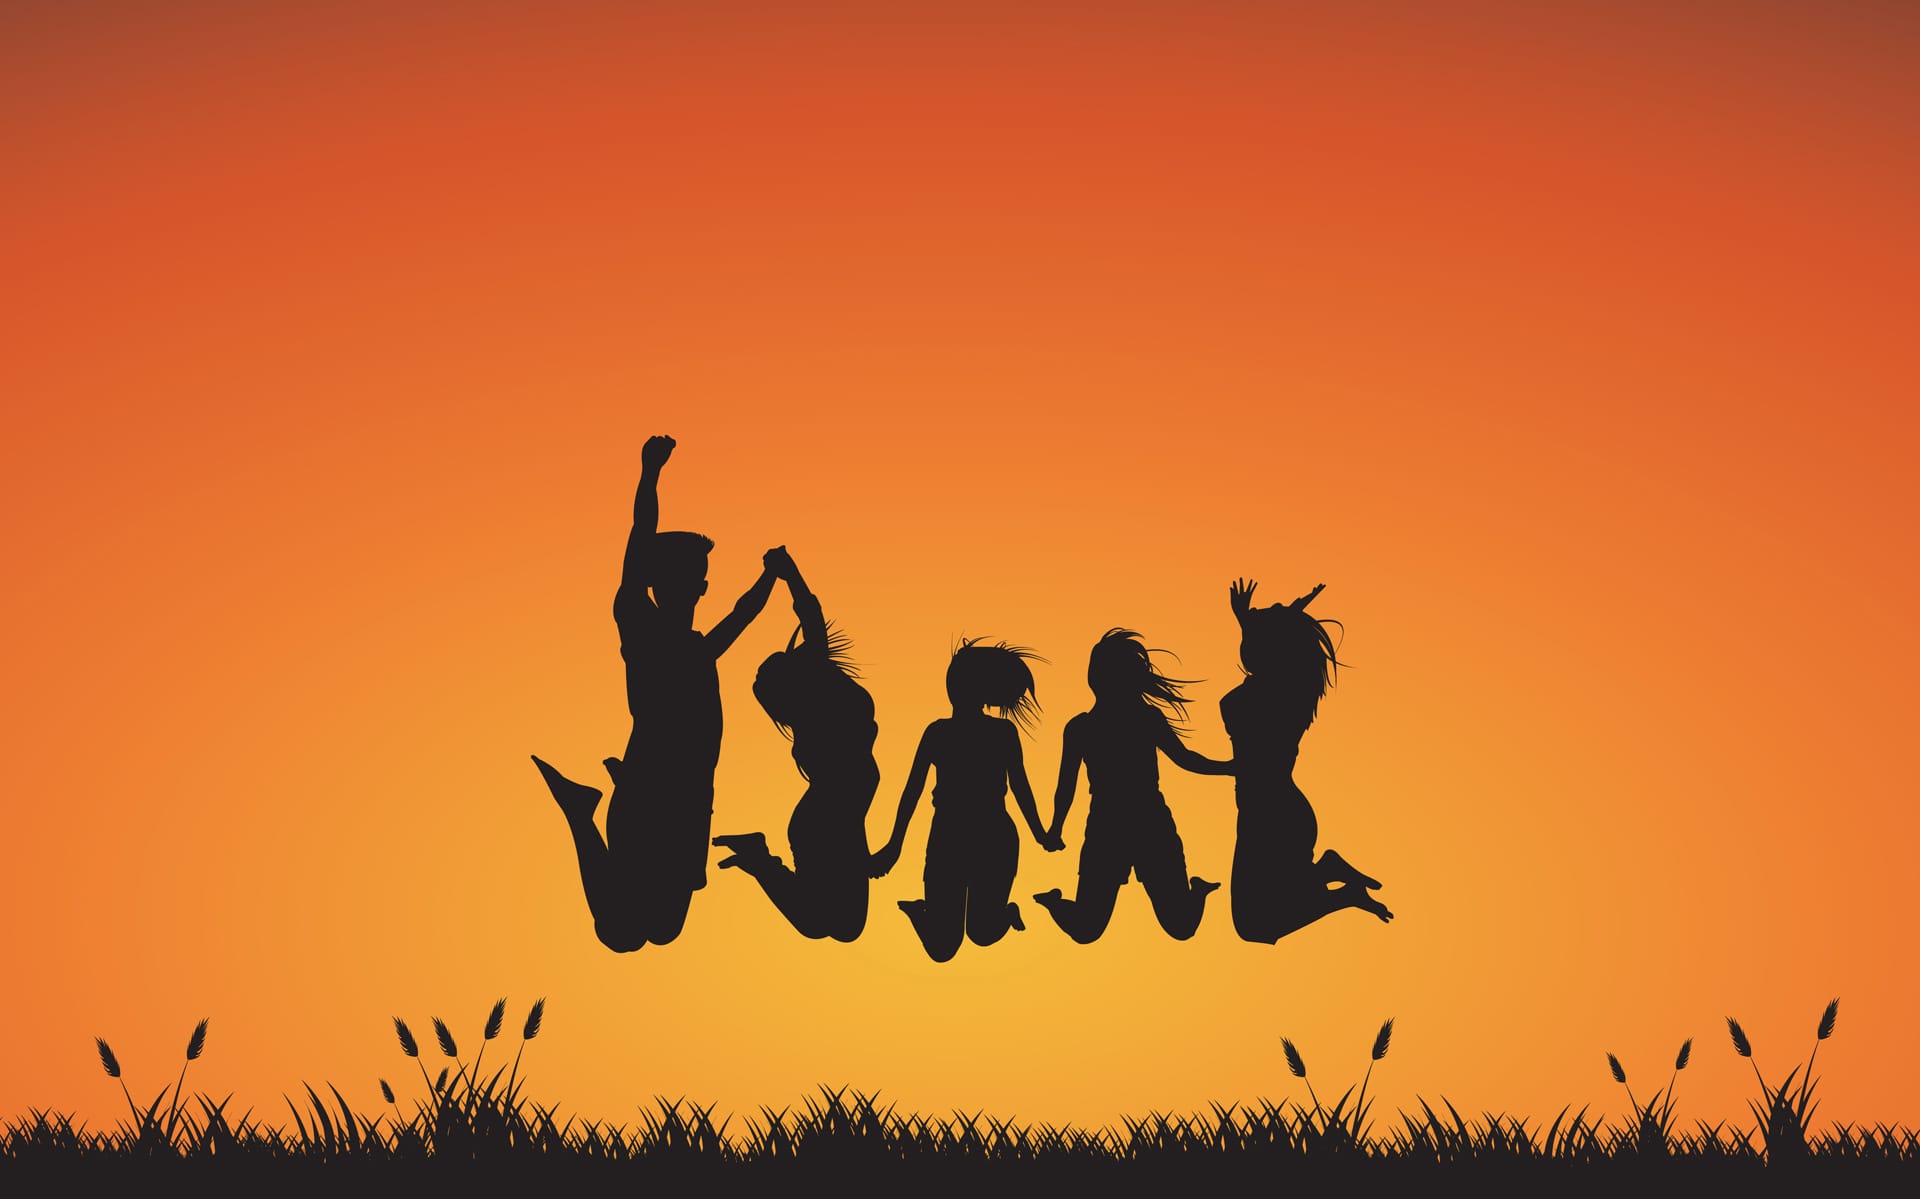 Silhouette group boy girl jumping nature sunset background